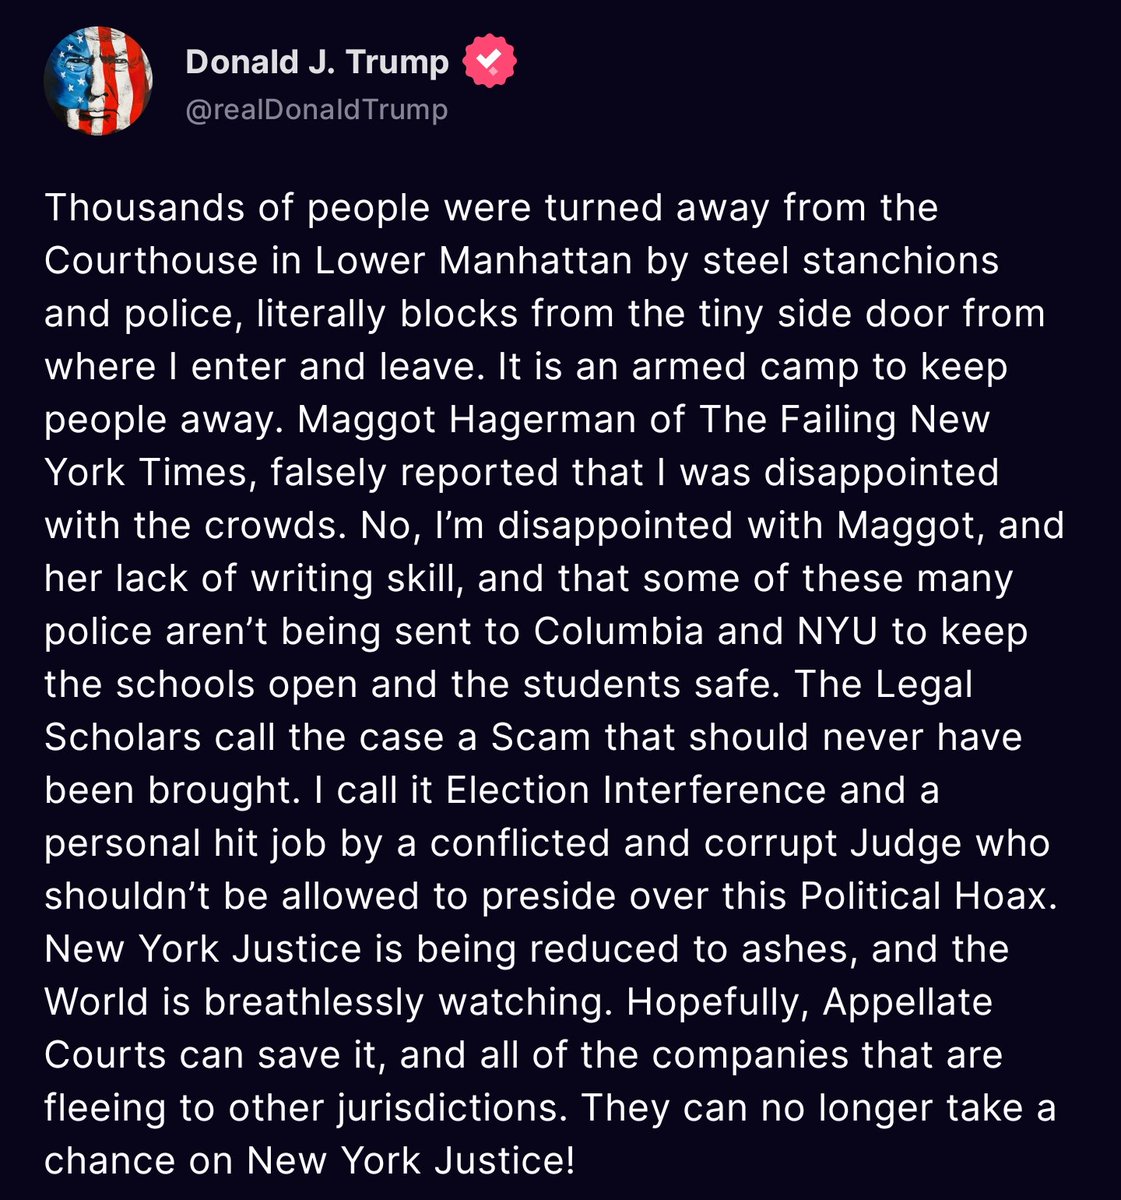 🦅🇺🇸A Message from Our President🇺🇸🦅 Thousands of people were turned away from the Courthouse in Lower Manhattan by steel stanchions and police, literally blocks from the tiny side door from where I enter and leave. It is an armed camp to keep people away. Maggot Hagerman of The